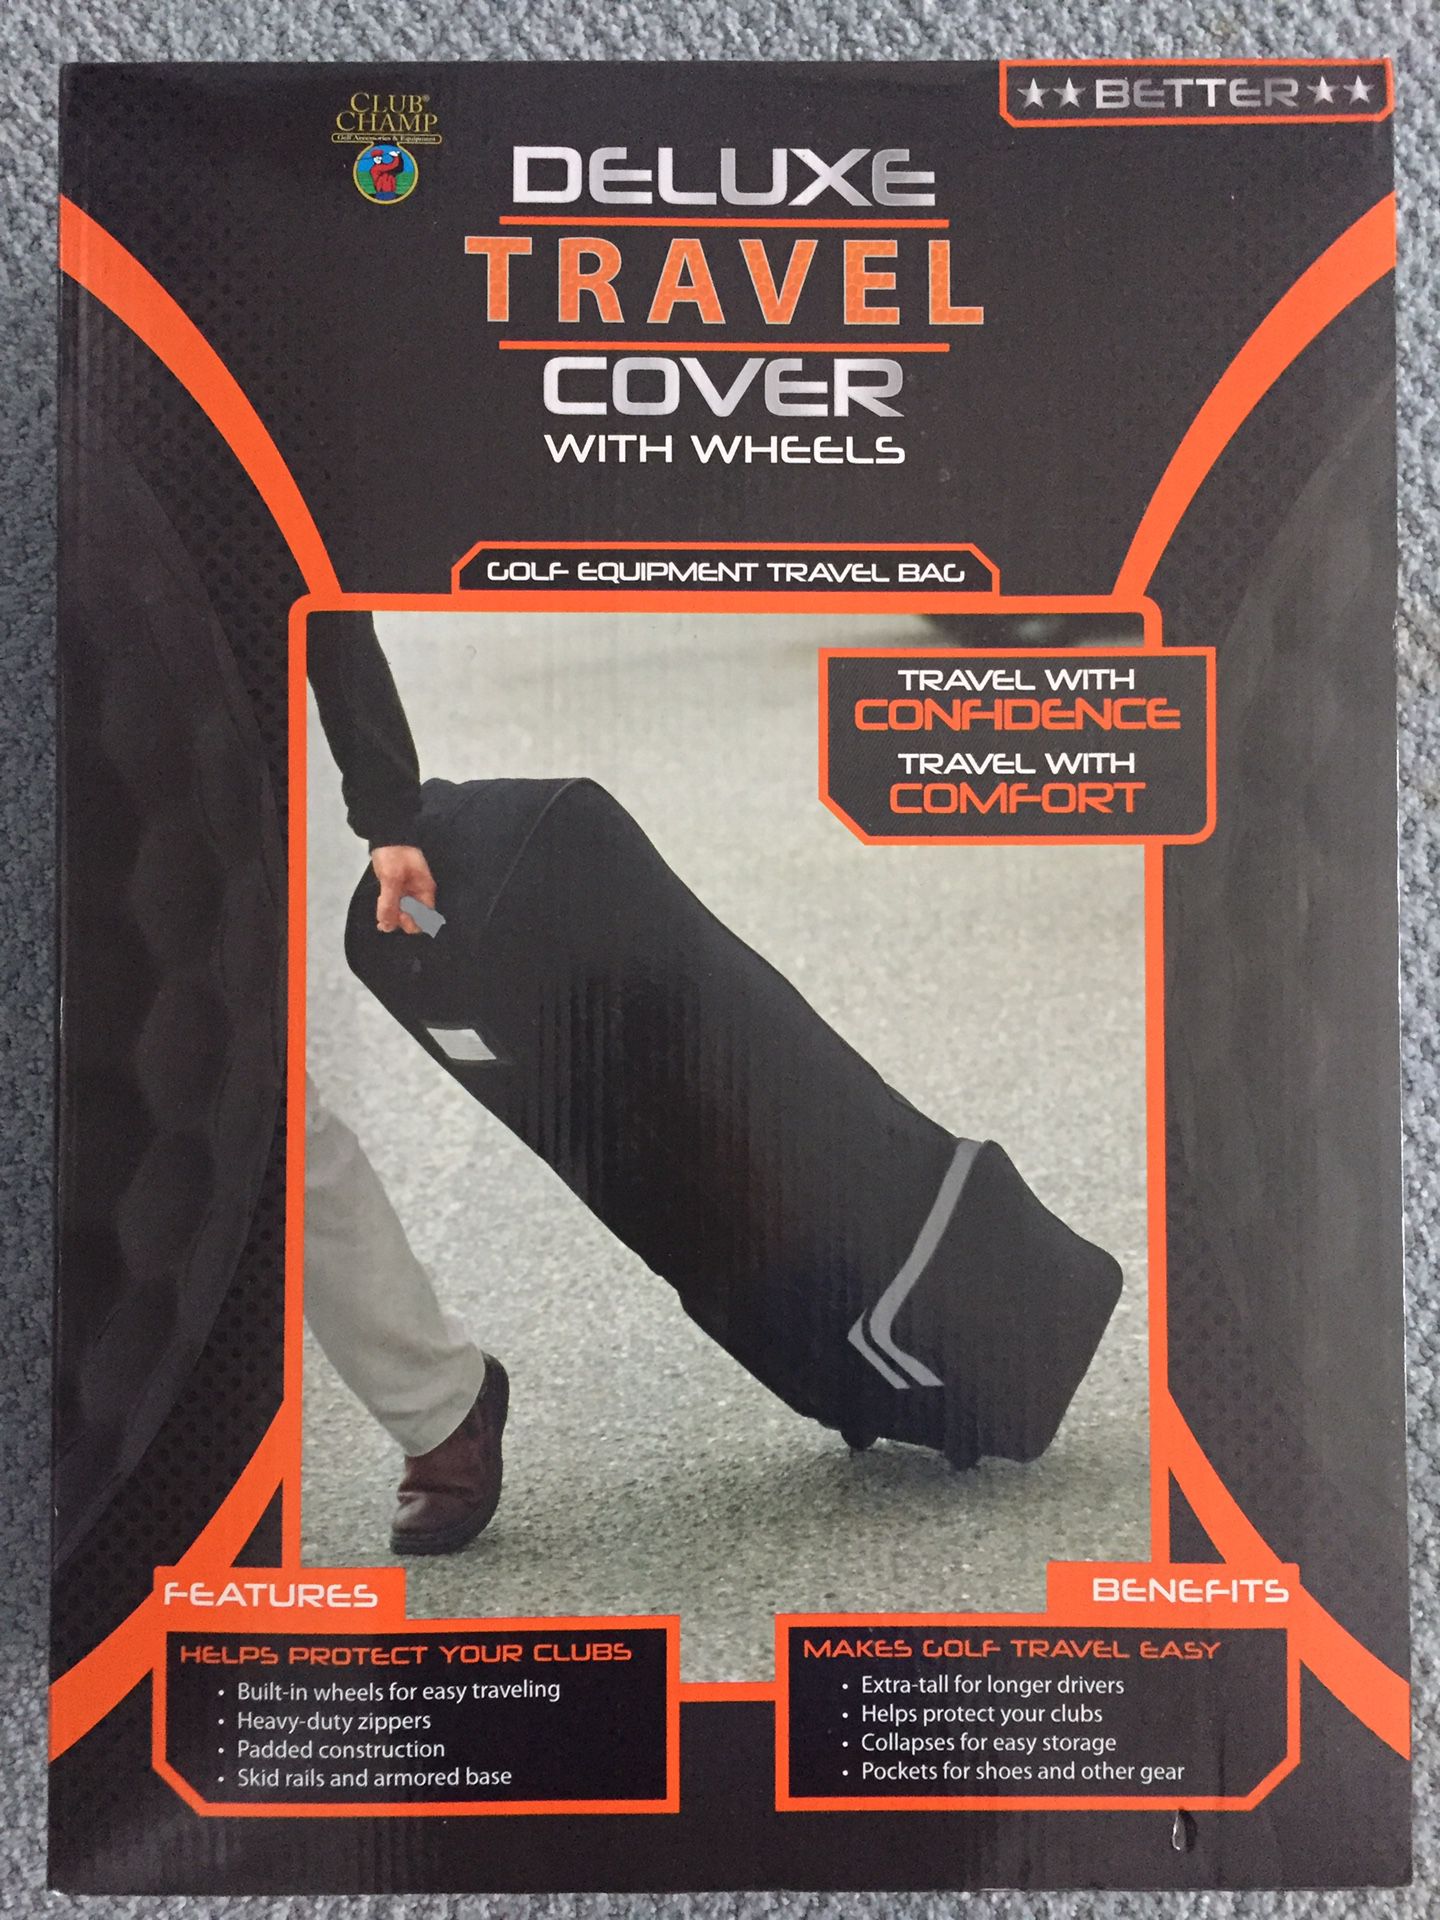 Golf travel bag cover with wheels NEW in box